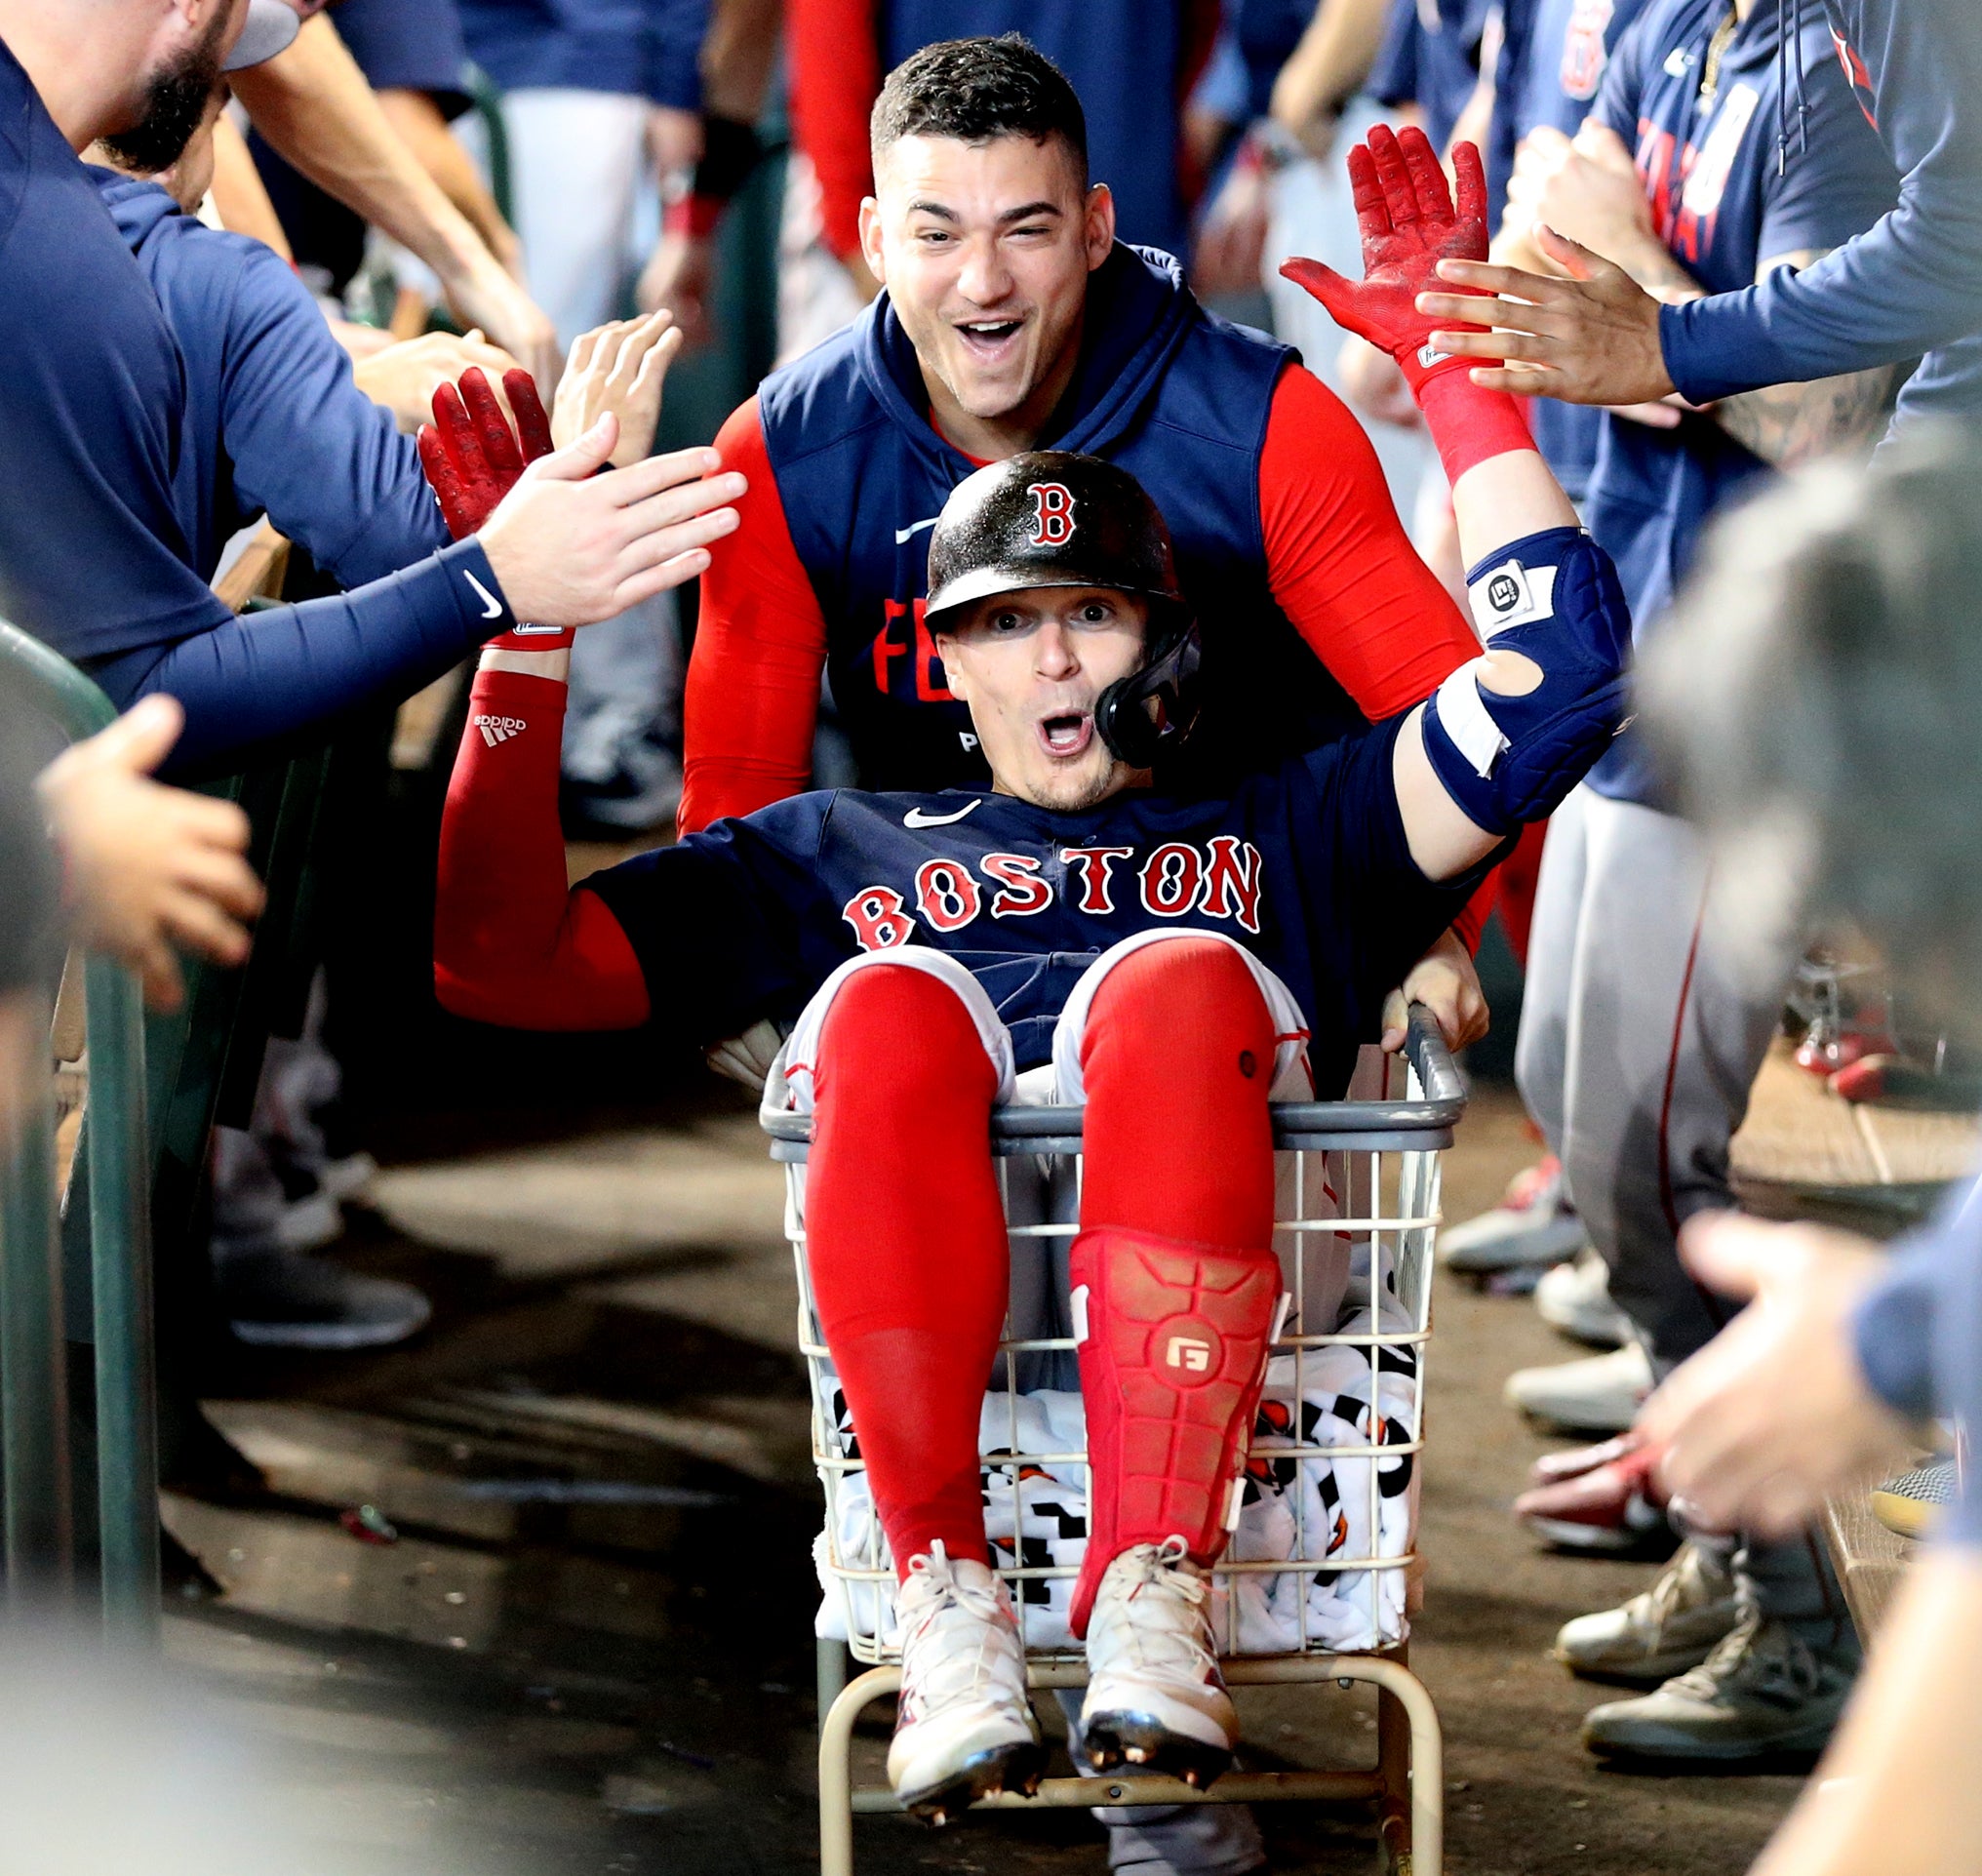 Jose Iglesias pushes Kiké Hernandez in the laundry cart following his solo home run in the fourth inning. Boston Red Sox at Houston Astros, Game 2 of the ALCS on Saturday, Oct. 16, 2021 at Minute Maid Park in Houston, Texas.